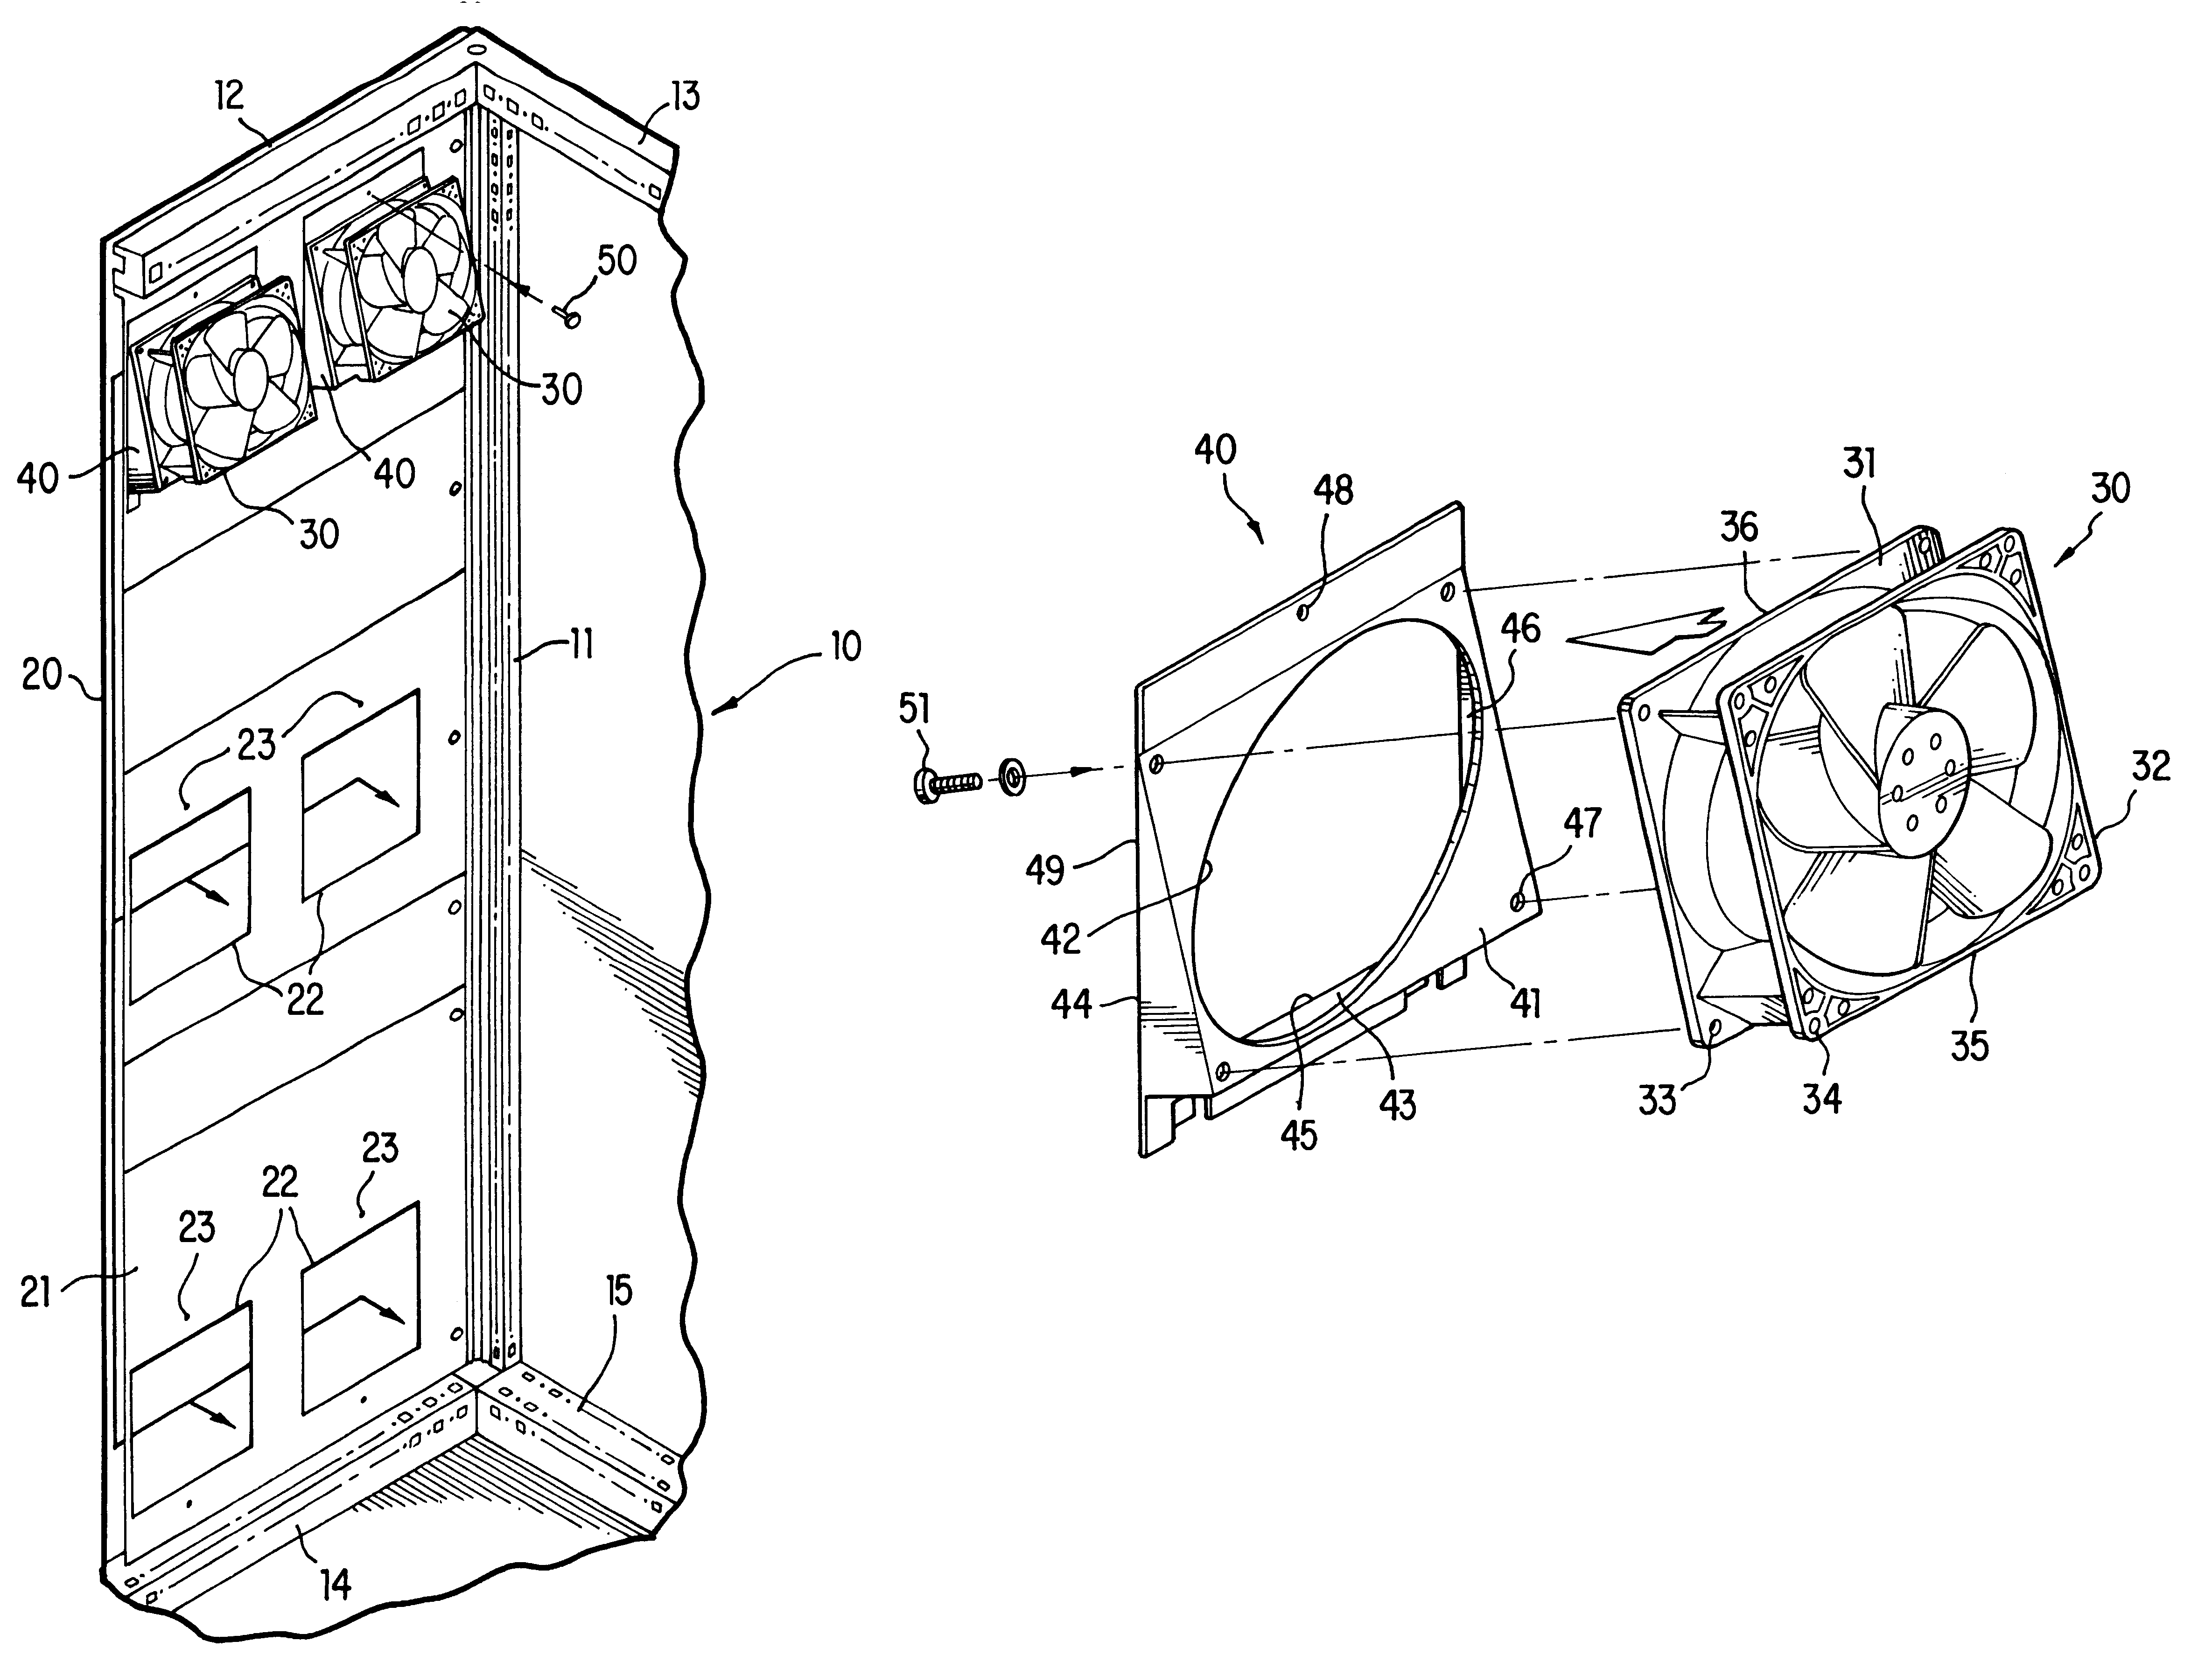 Fan for mounting on a wall member of a control cabinet